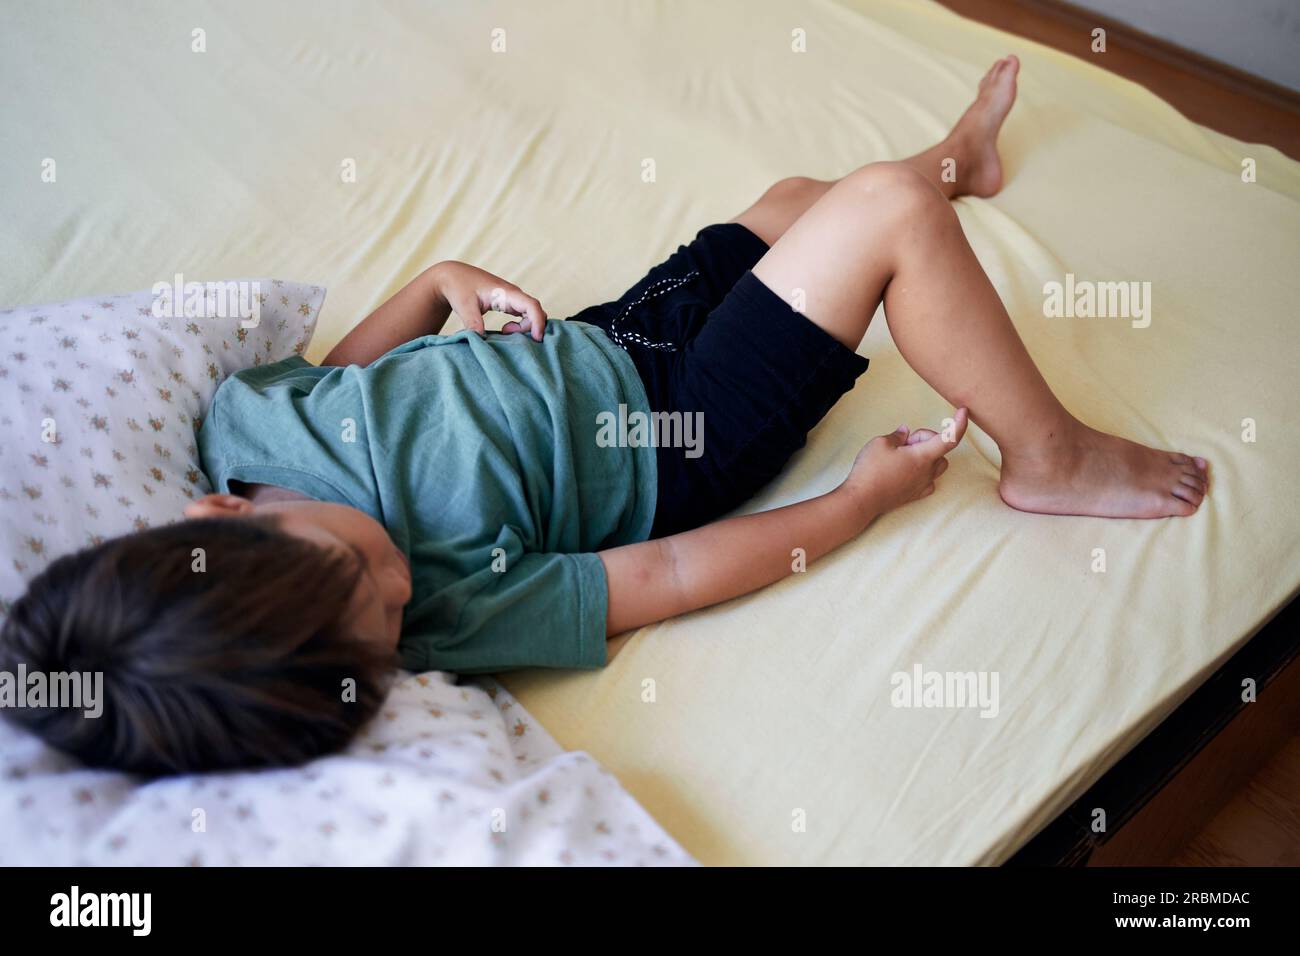 Mosquito bites sore and scar on child leg, a boy scratching at lesion. Stock Photo